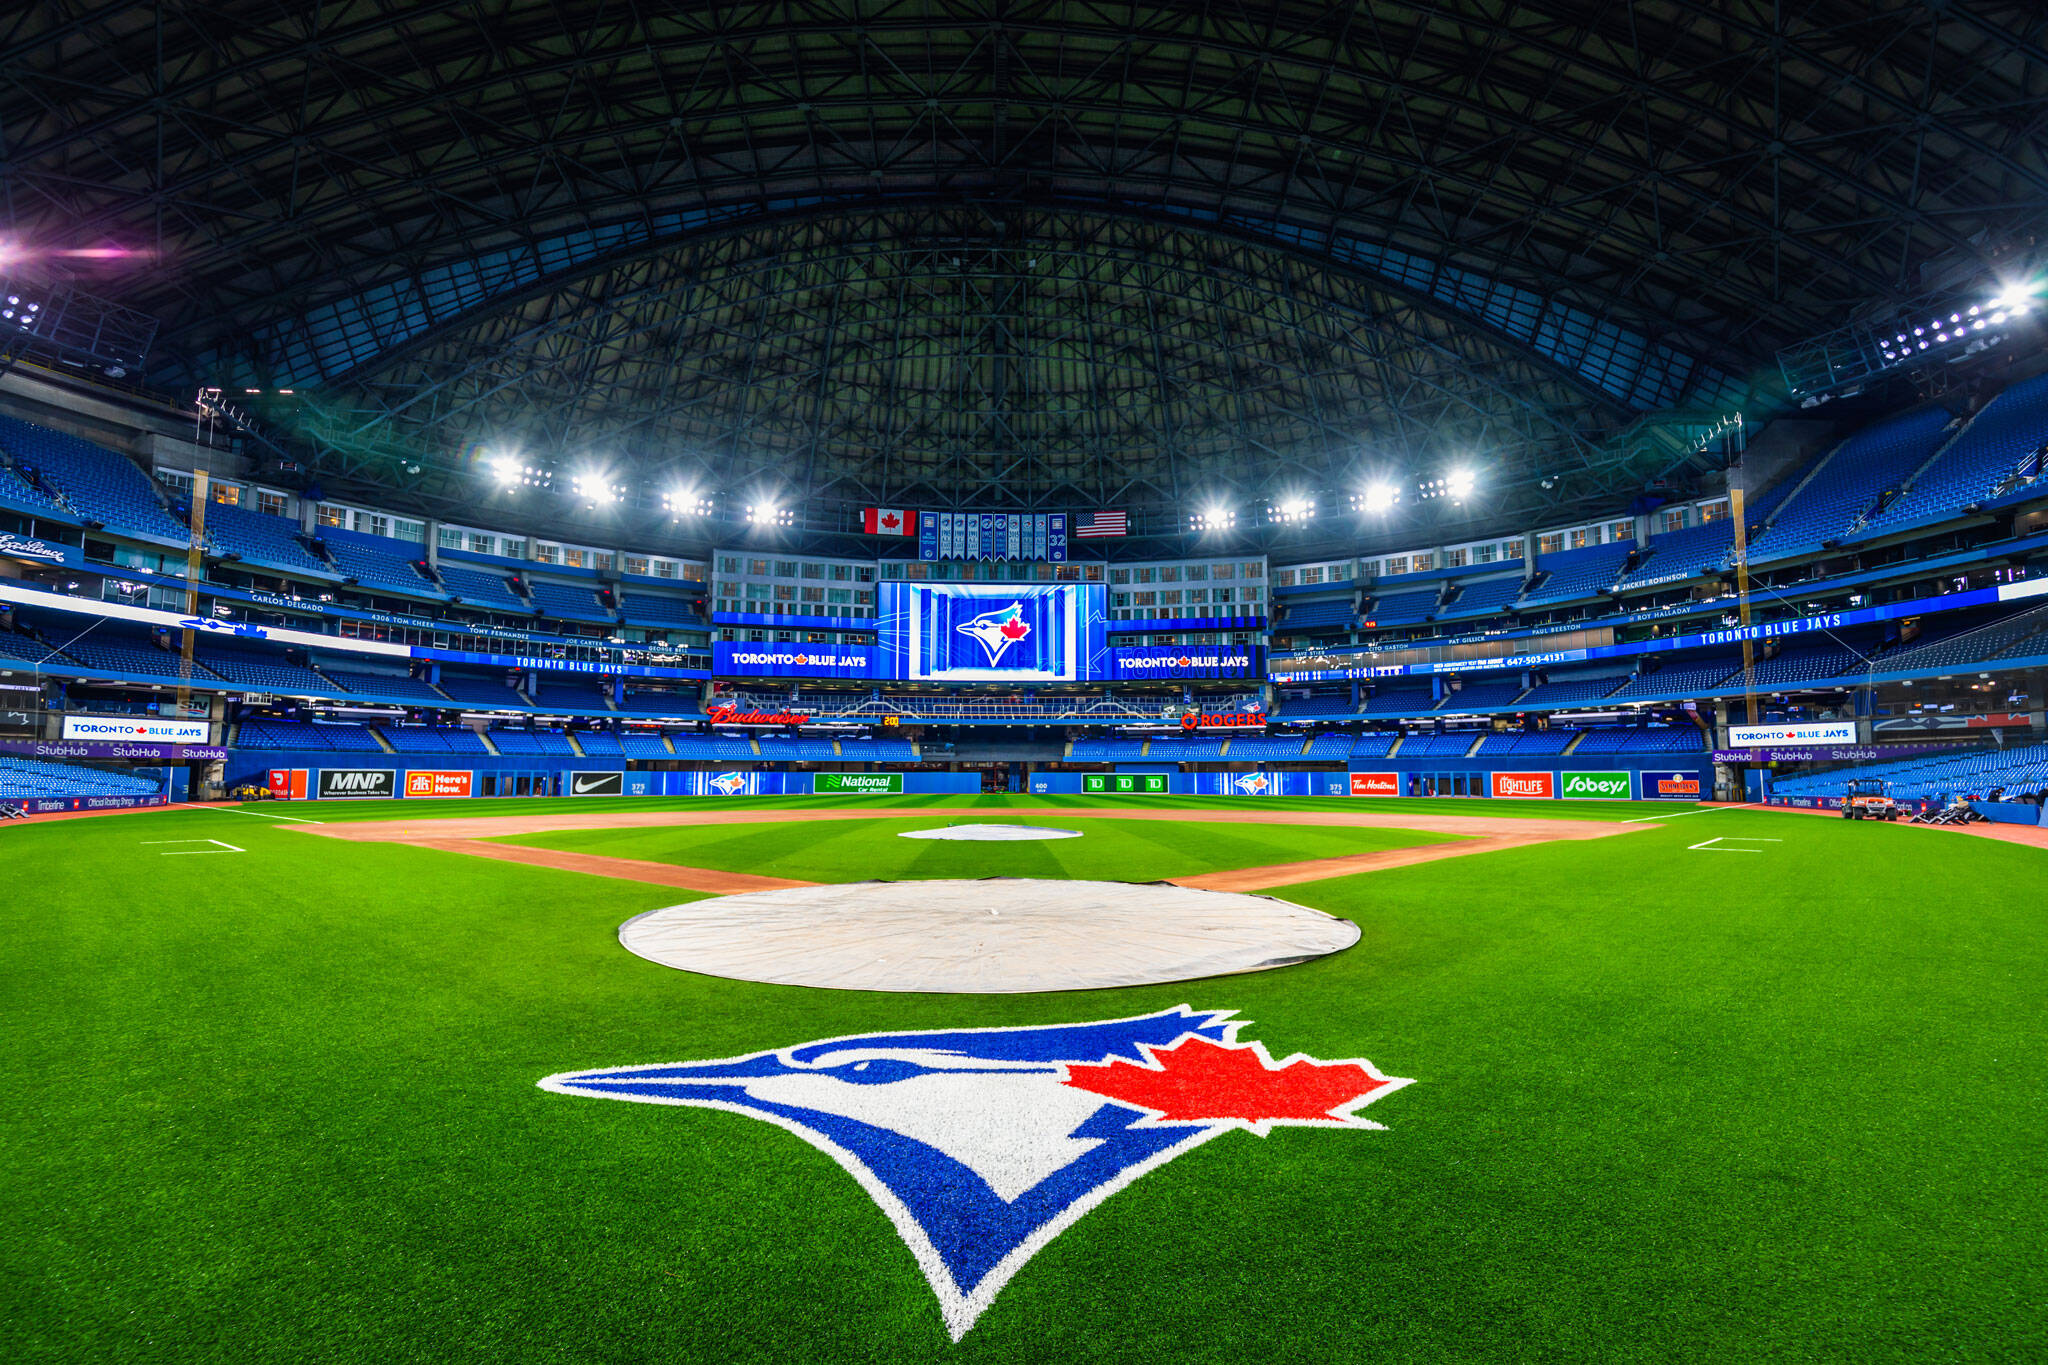 Toronto Blue Jays Fans Playoff Tickets Revoked After Correctly